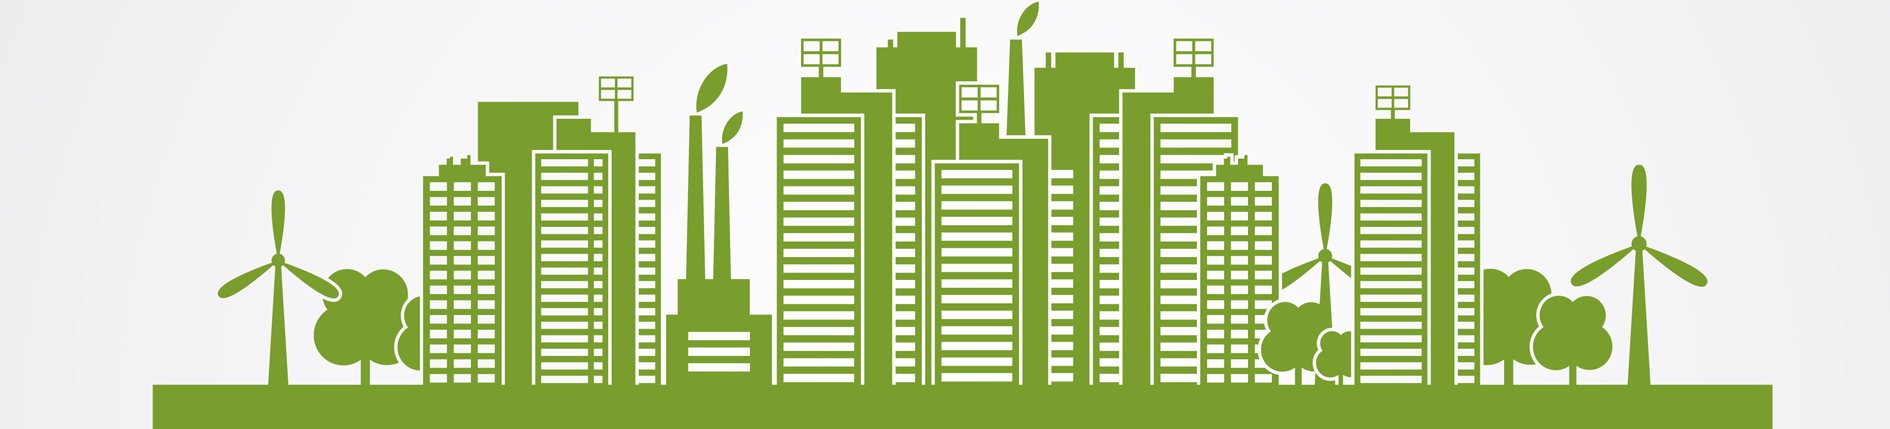 Criteria of Green Buildings according to GREENSHIP